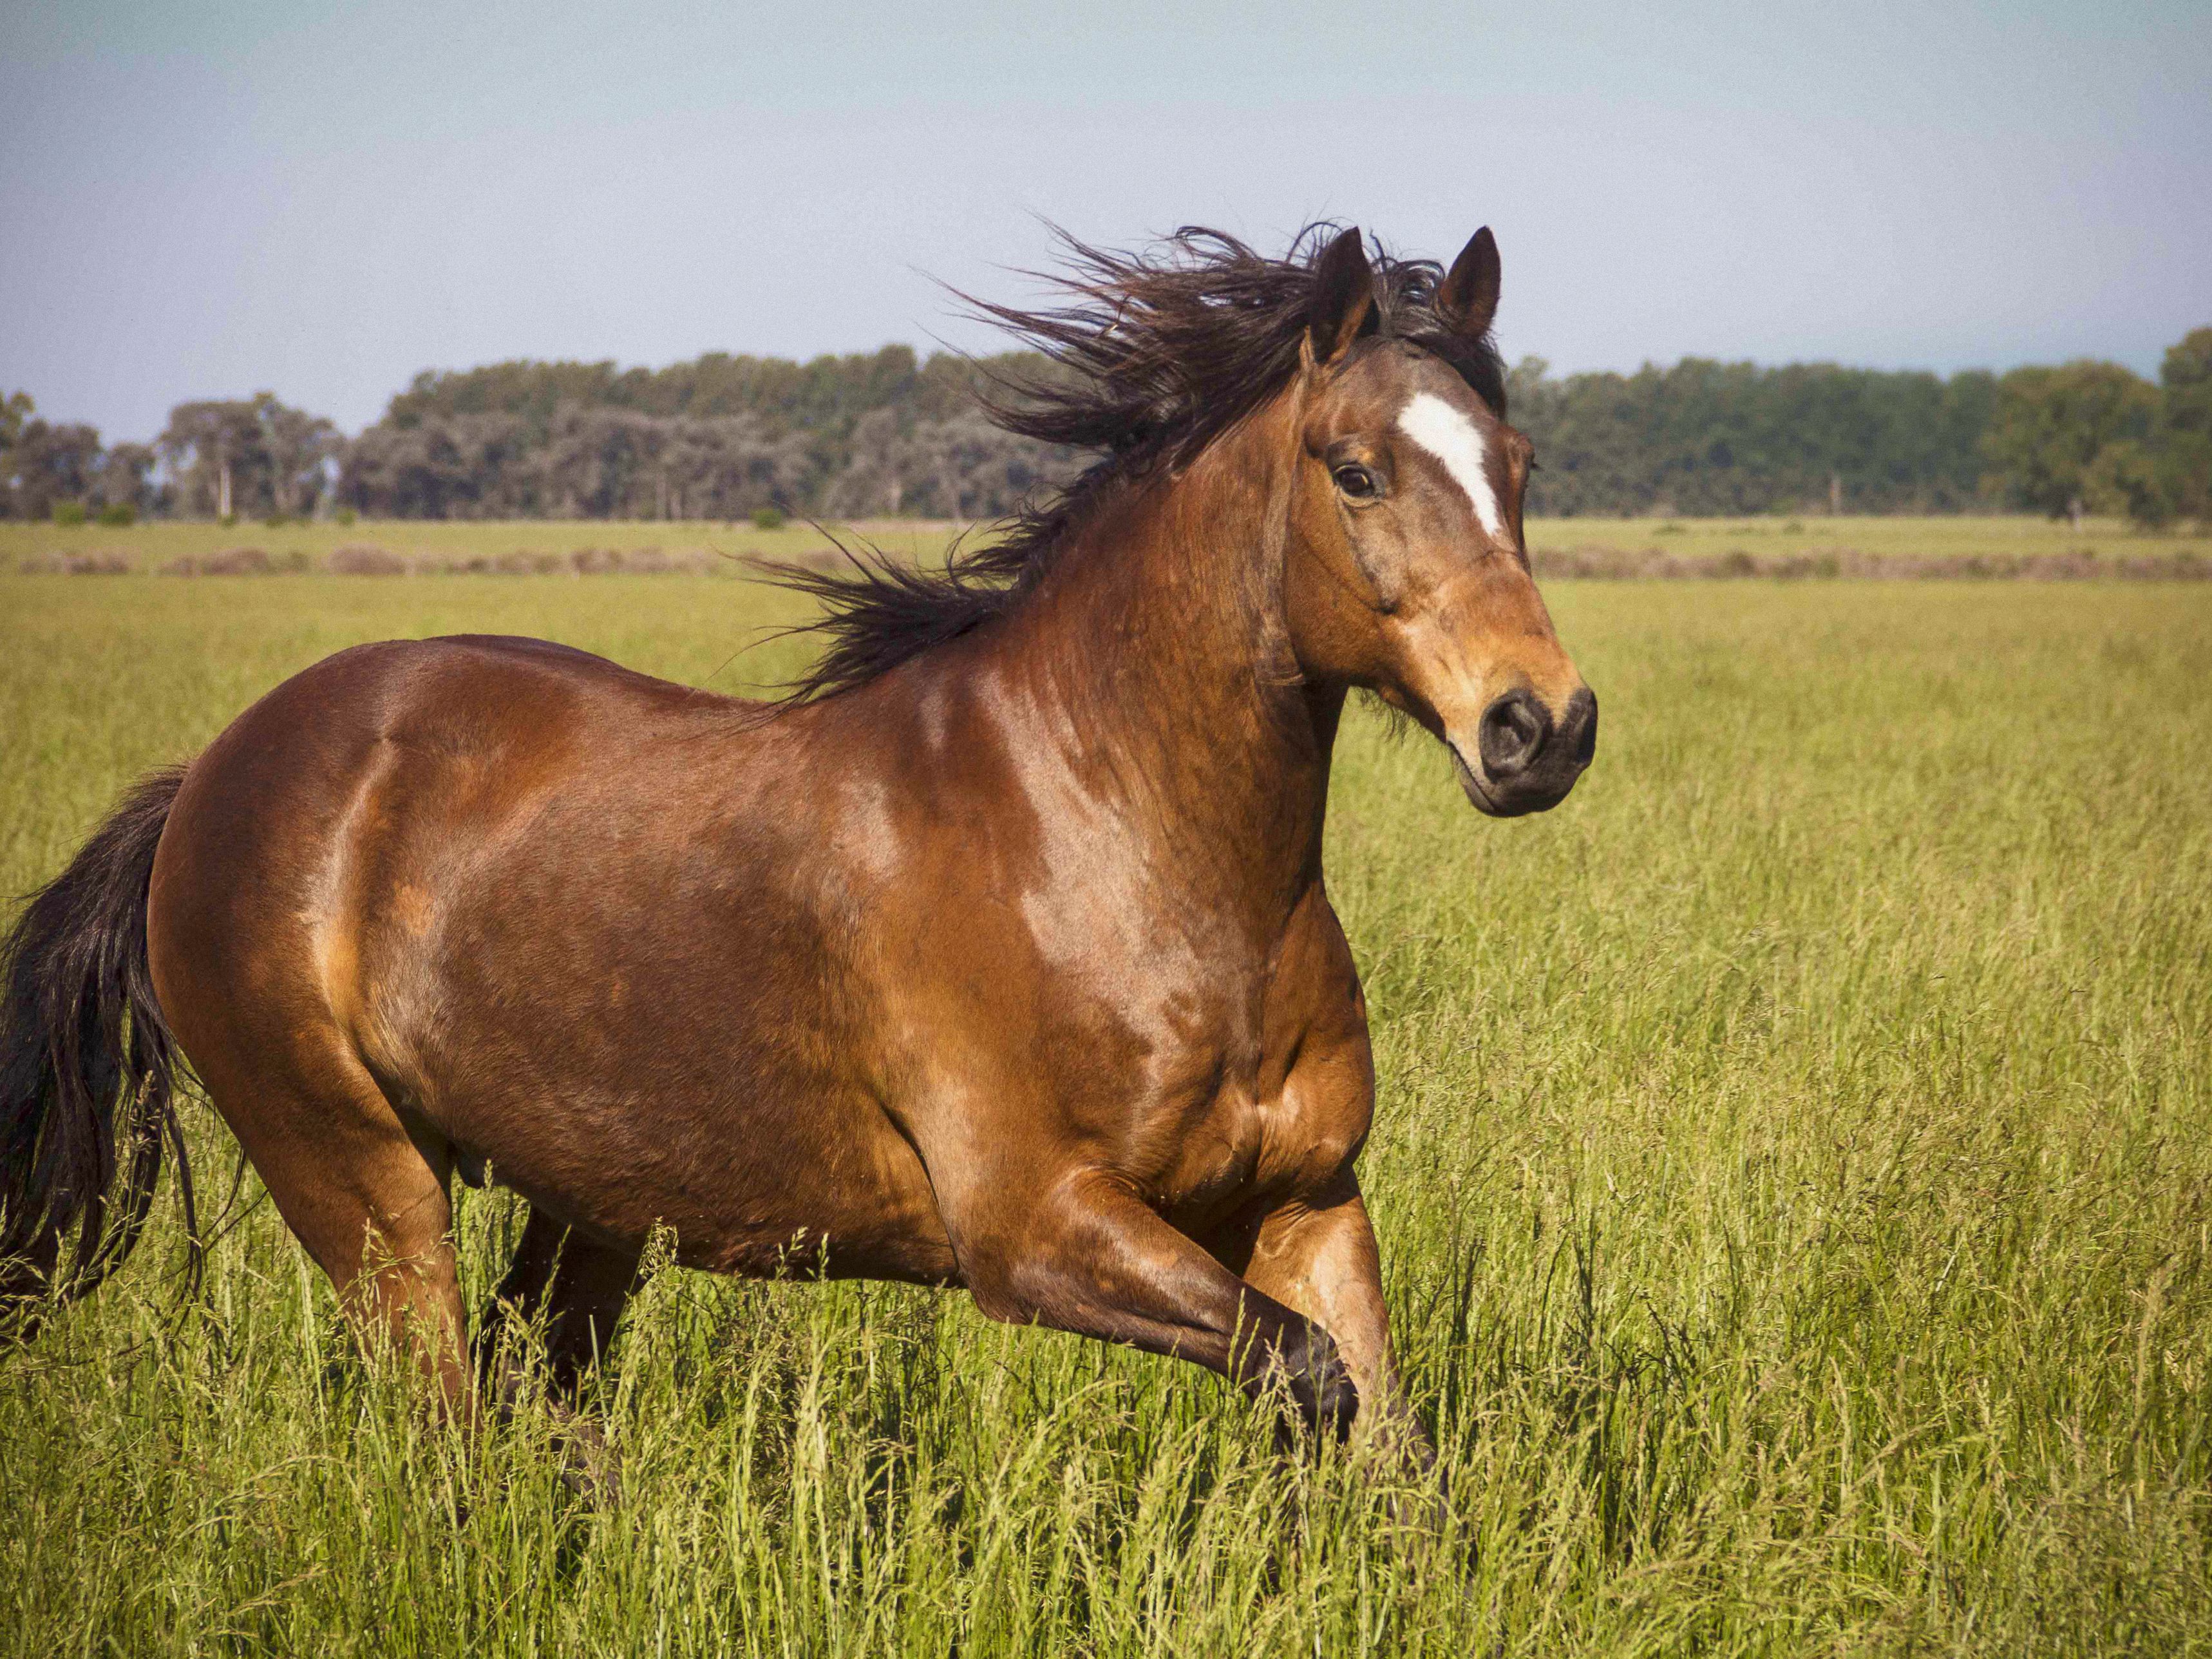 A brown horse galloping in a field of grass